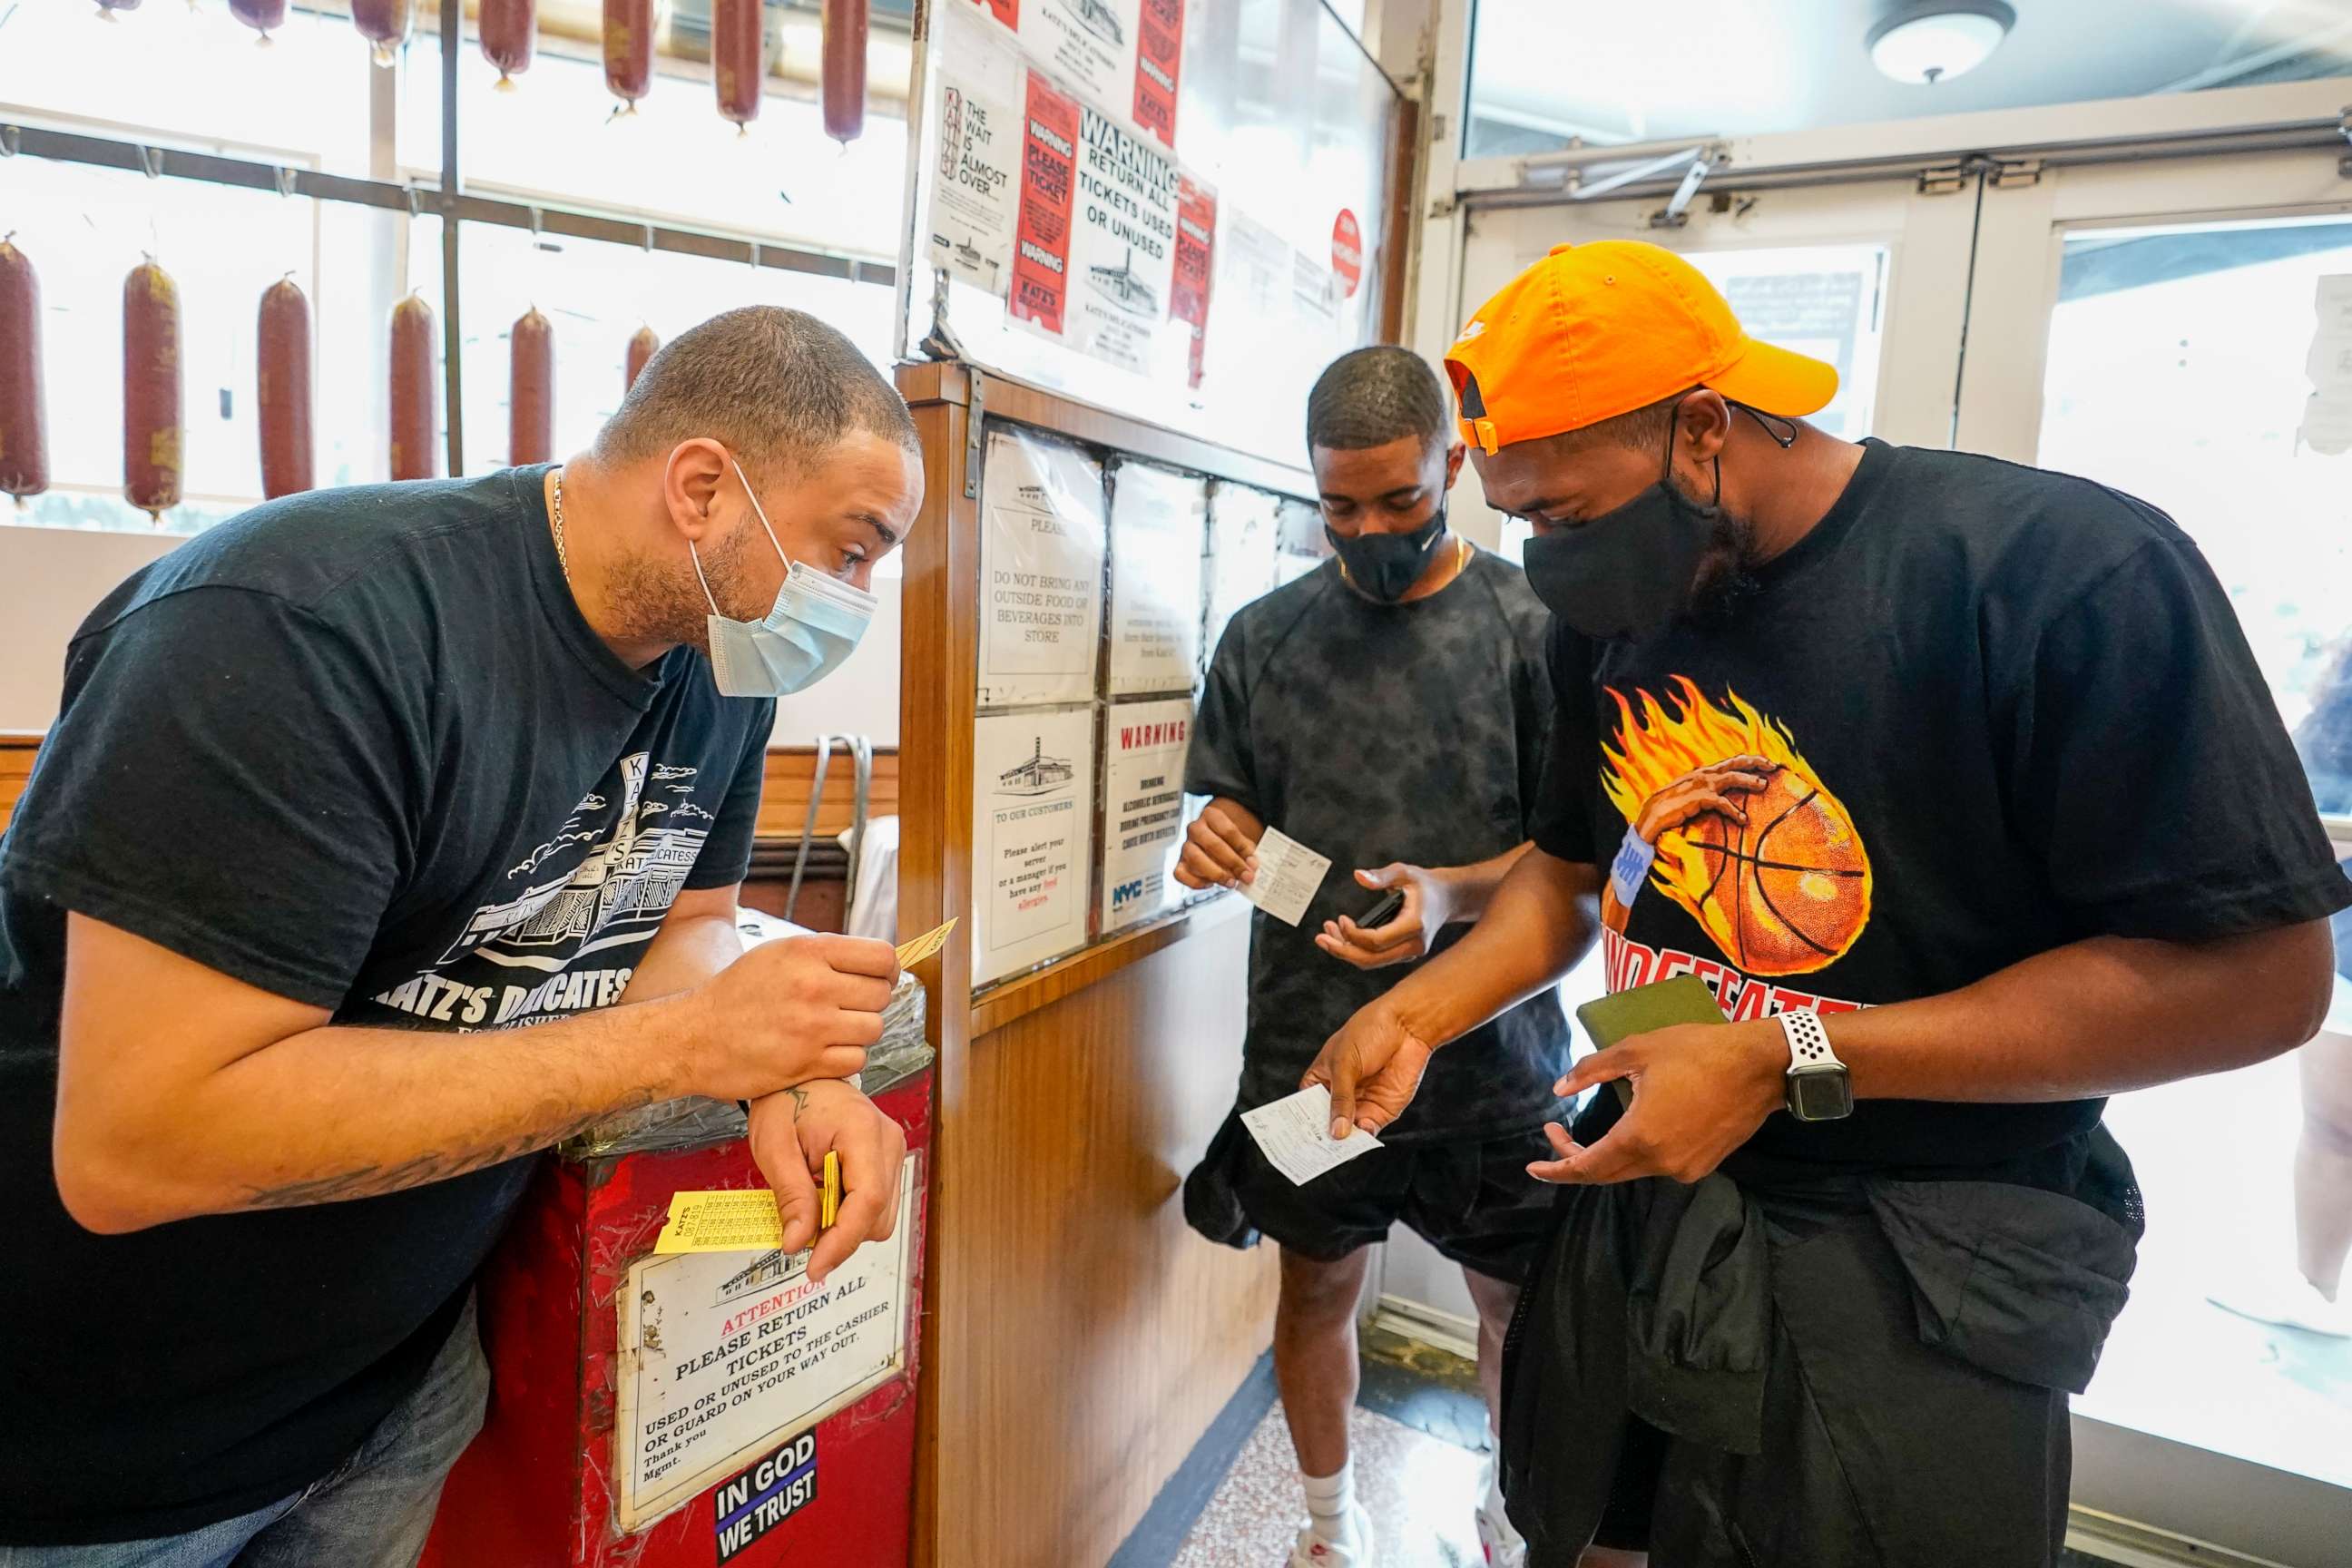 PHOTO: A Katz's Deli employee checks the proof of vaccination from customers who want to eat inside the restaurant, Aug. 17, 2021, in New York.